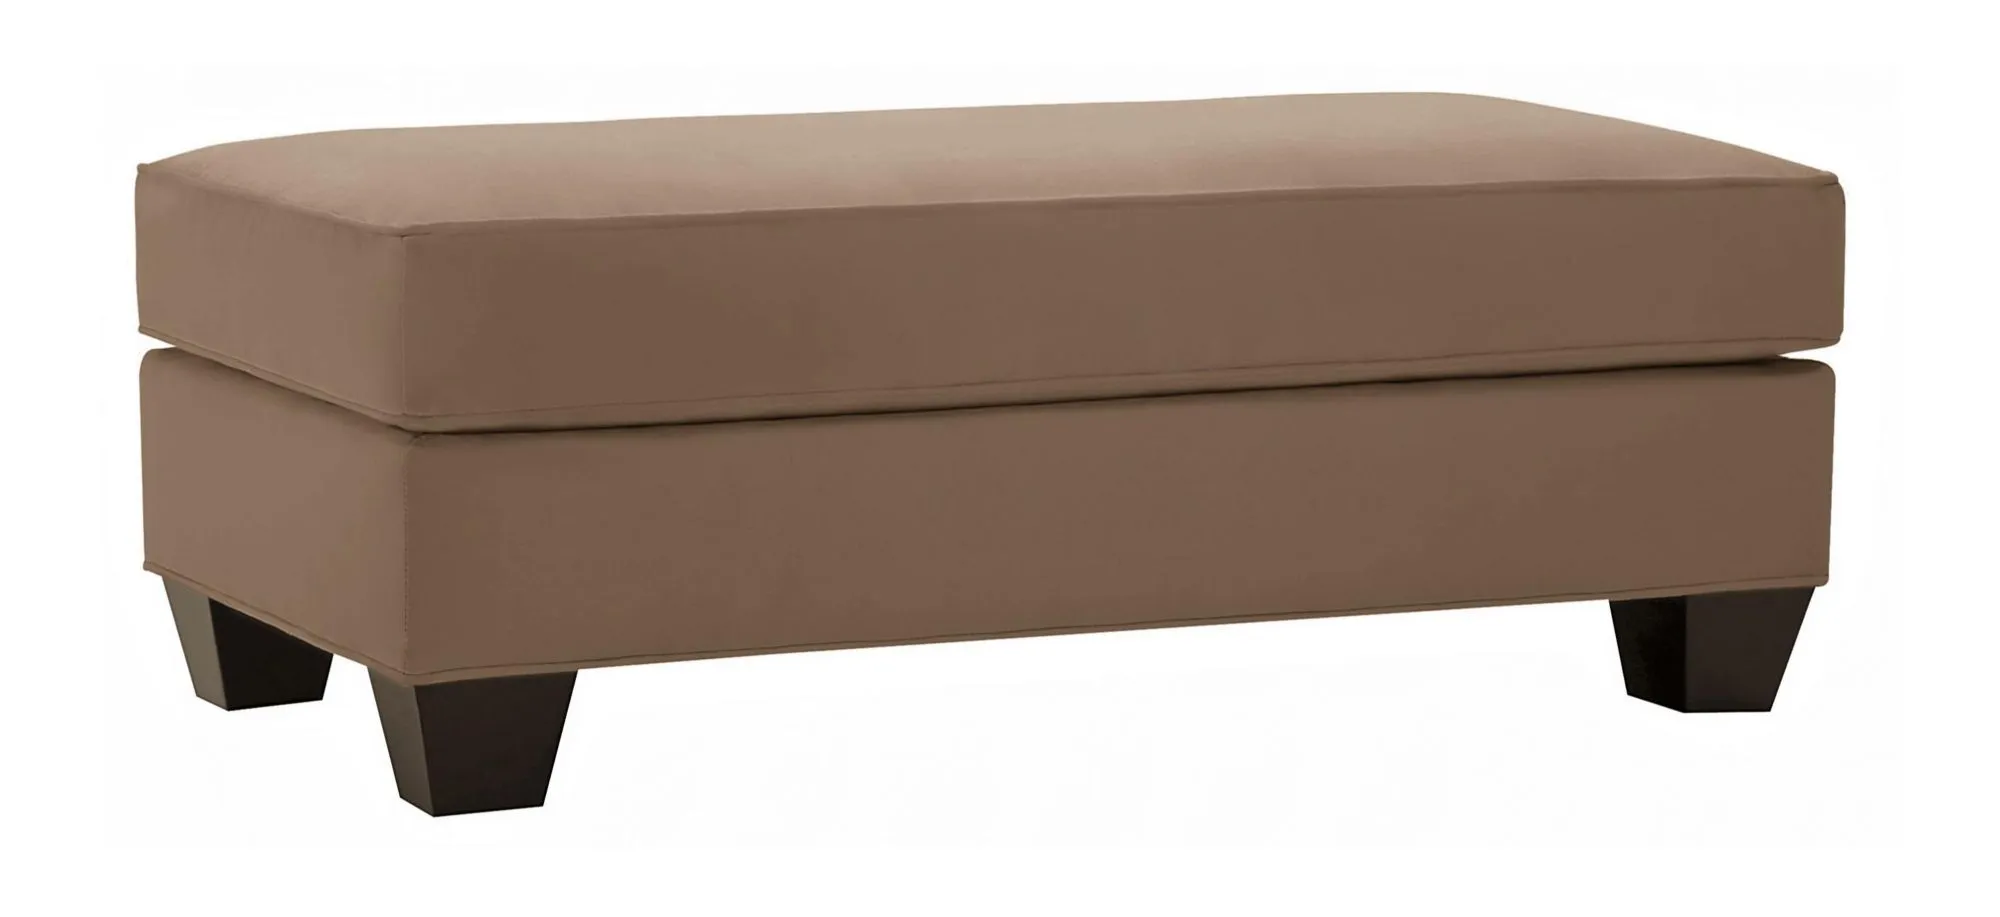 Briarwood Chair-and-a-Half Ottoman in Suede So Soft Khaki by H.M. Richards